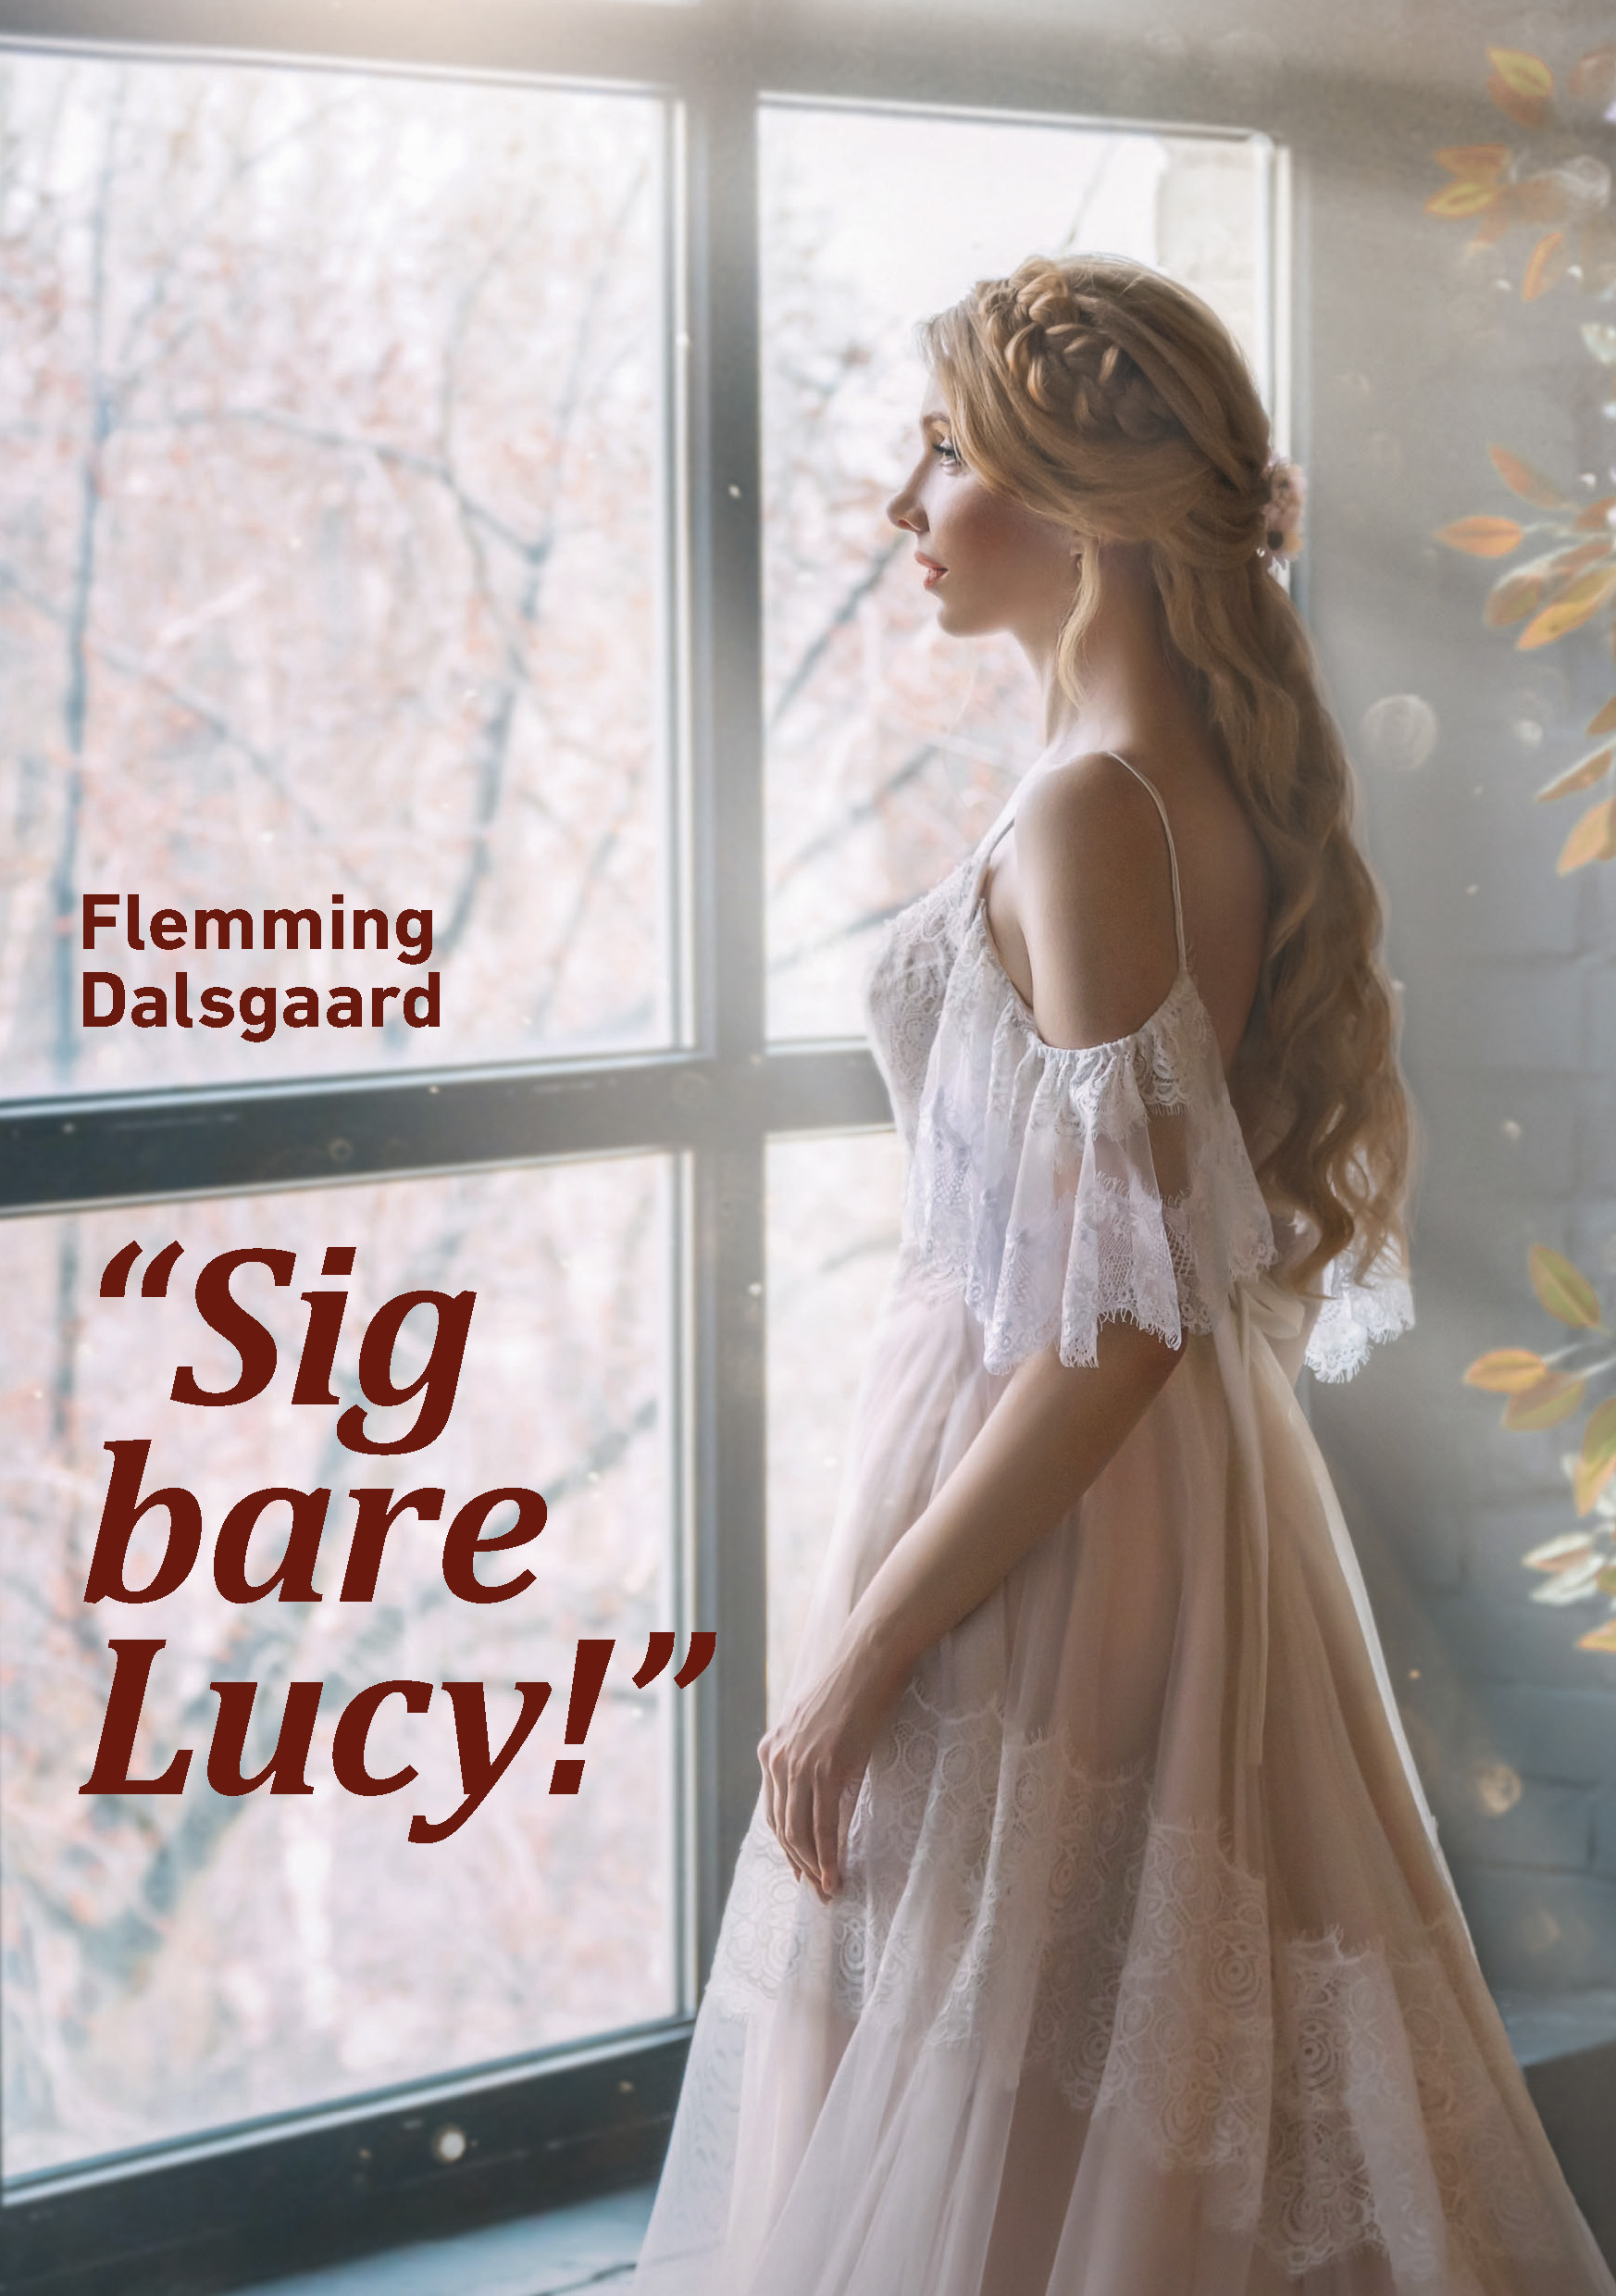 Flemming Dalsgaard: “Sig bare Lucy!”